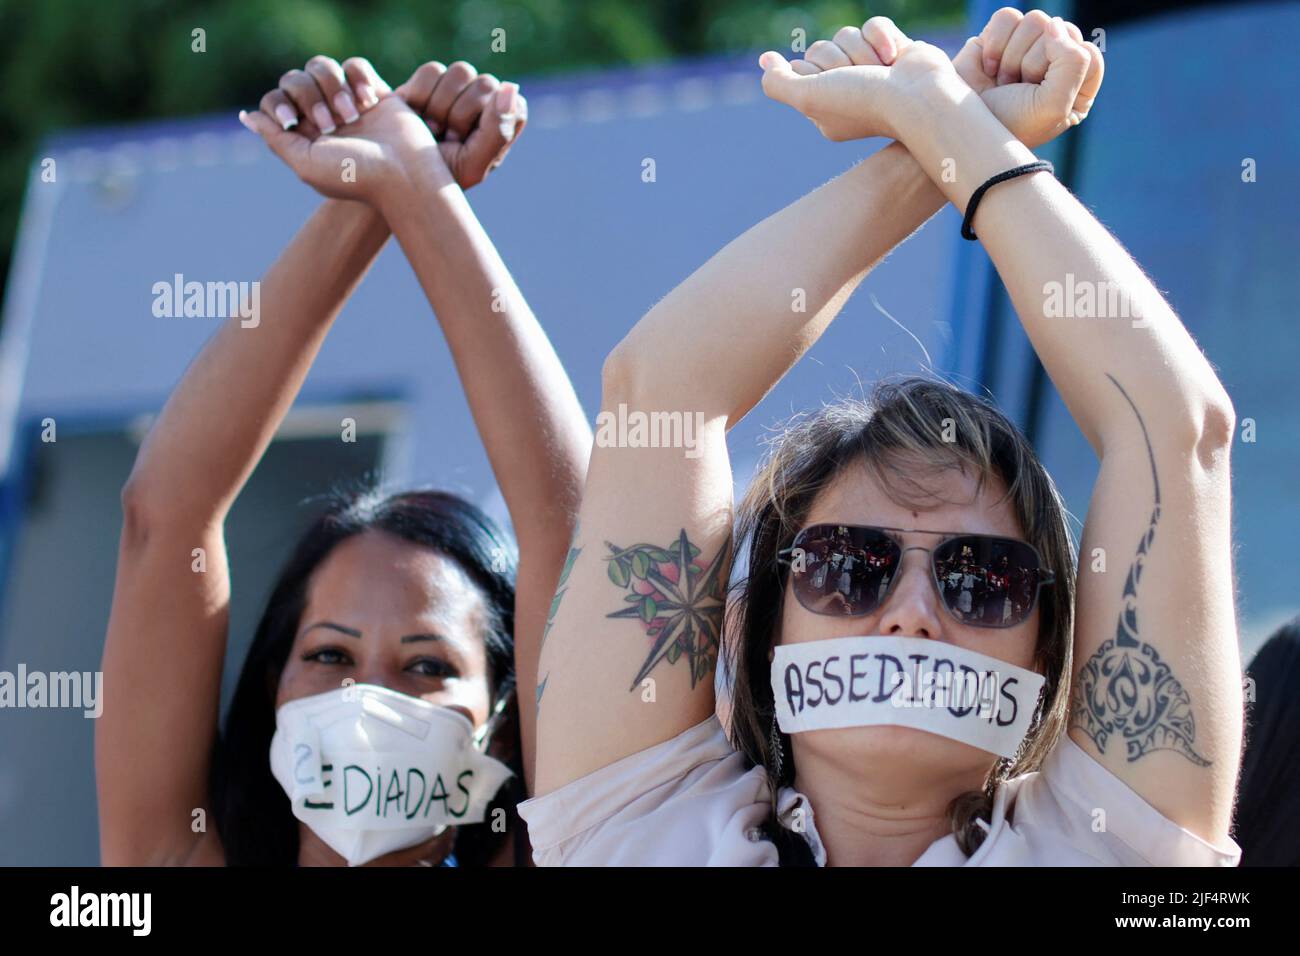 Employees of Caixa Economica Federal bank wear stickers over their mouths, reading 'Harassment', during a protest against the bank's president Pedro Guimaraes after allegations of sexual harassment, outside the bank's headquarters in Brasilia, Brazil June 29, 2022. REUTERS/Ueslei Marcelino Stock Photo